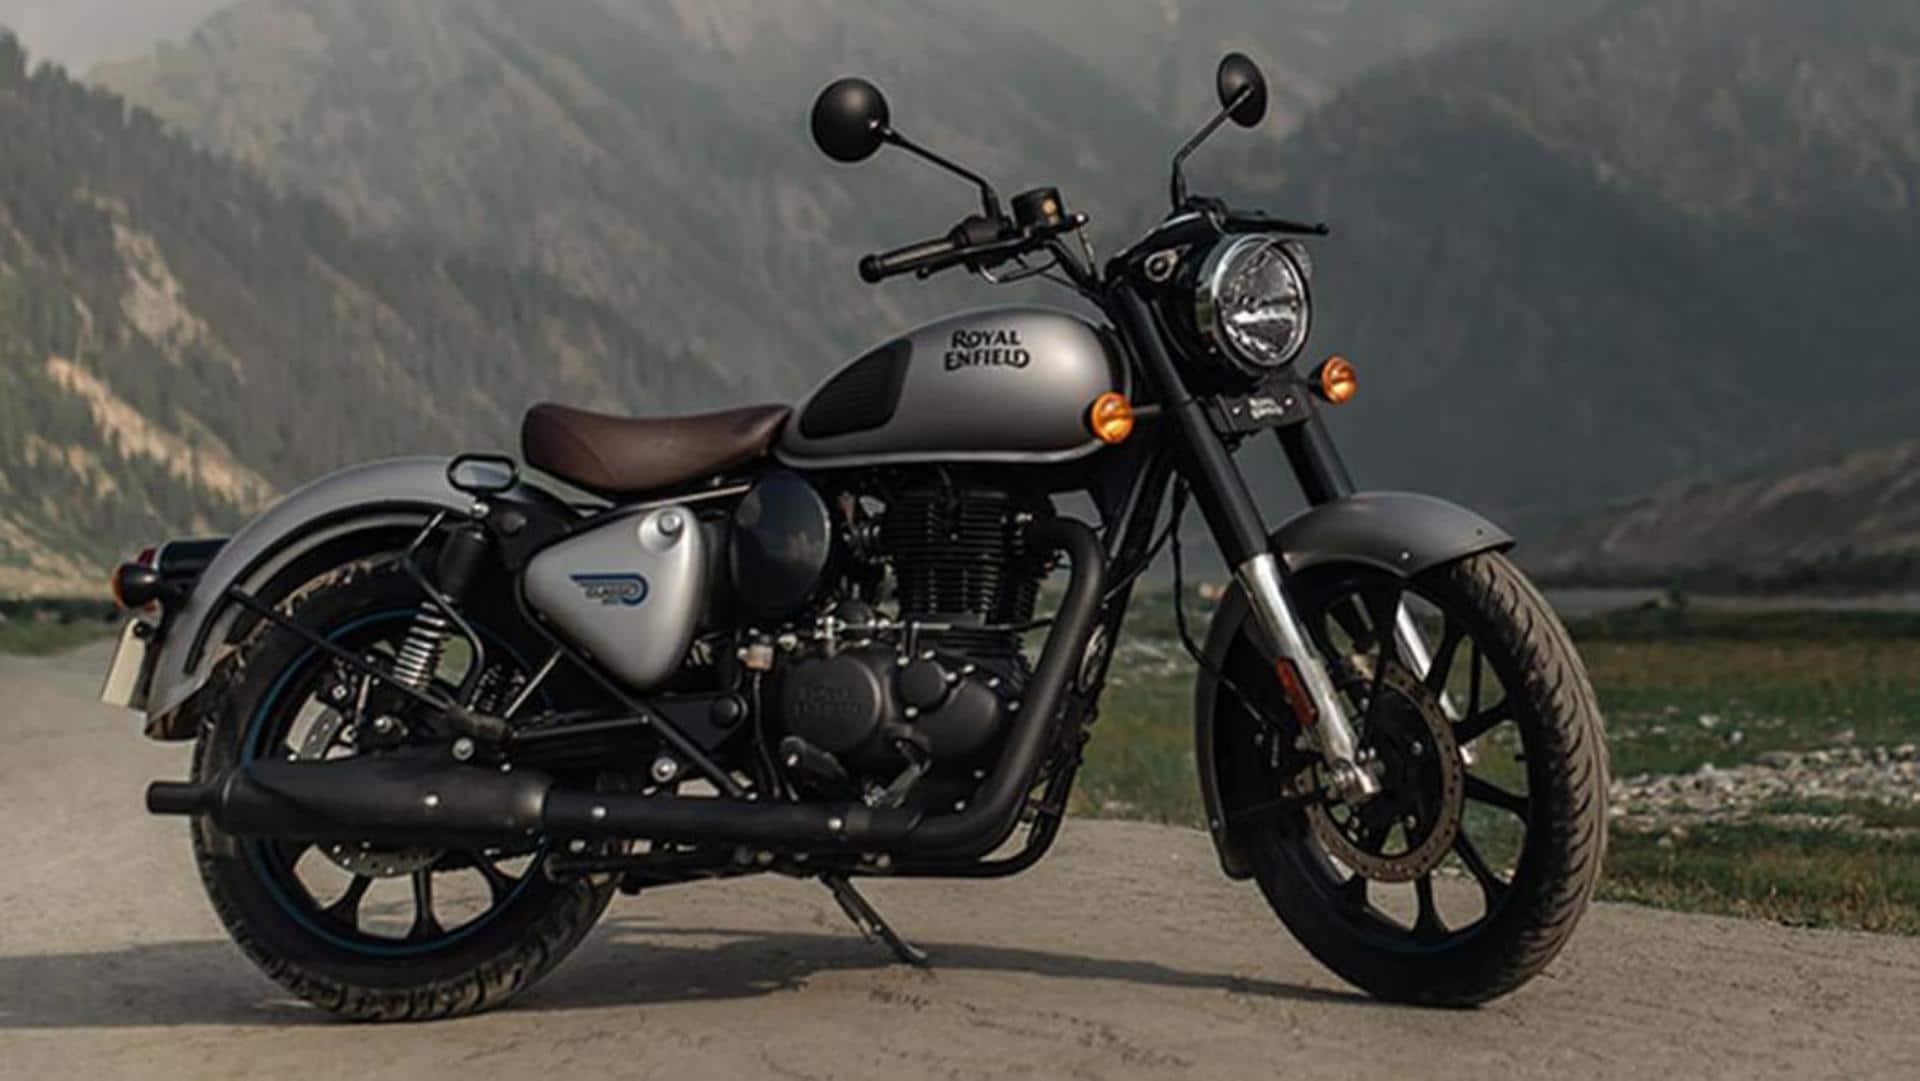 Royal Enfield Super Meteor 650 debuts tomorrow What to expect?